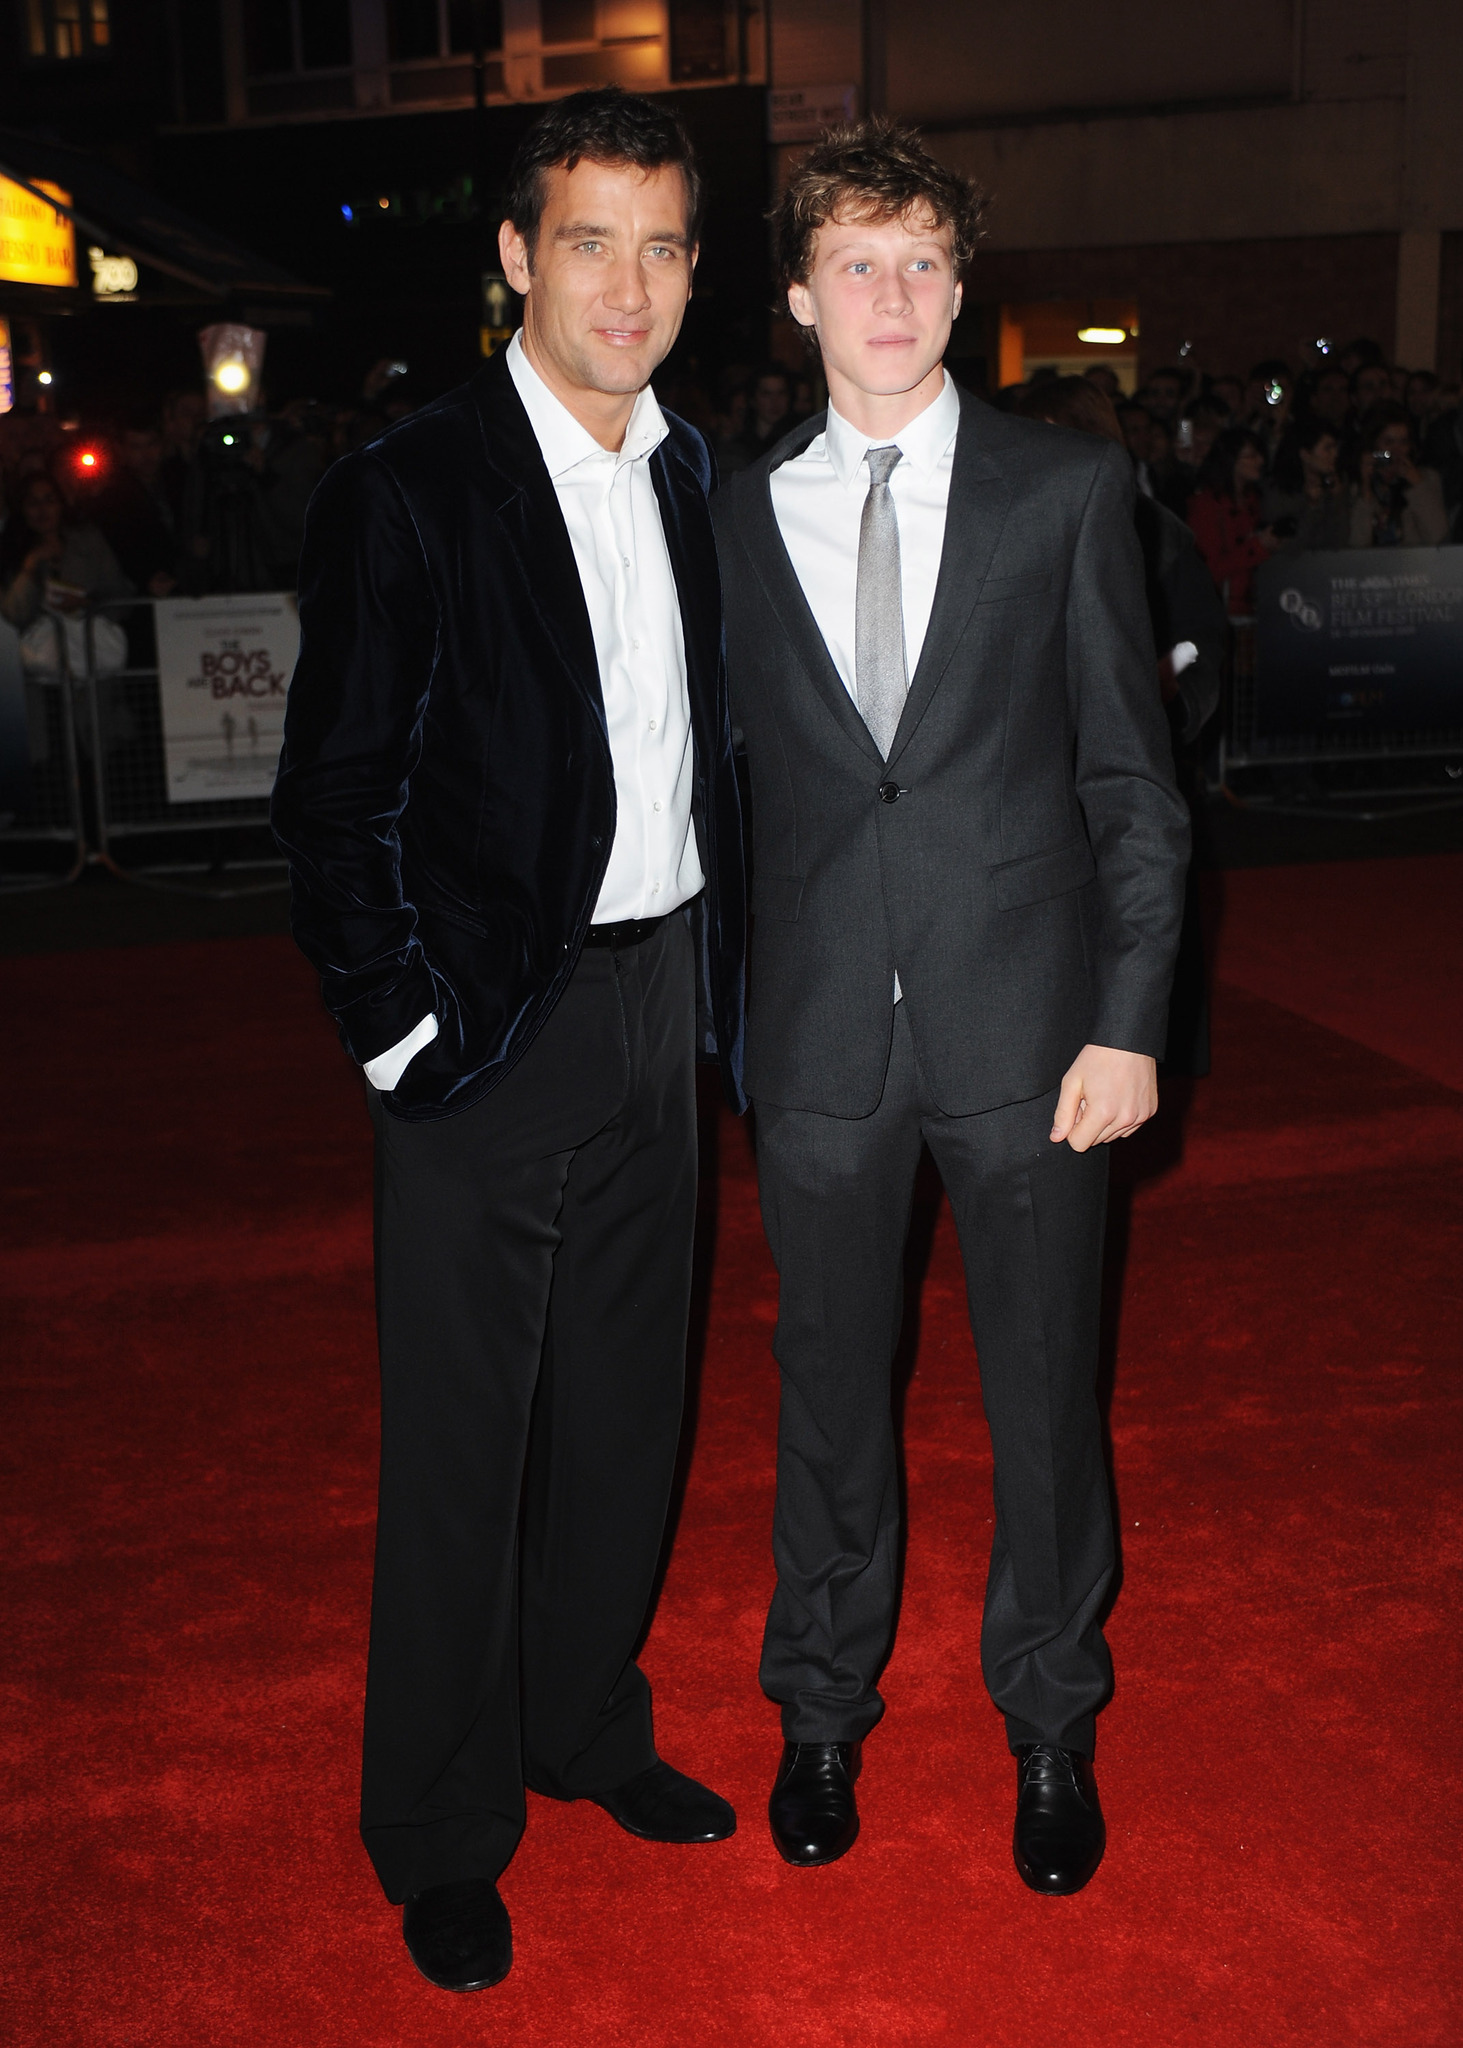 Clive Owen and George MacKay